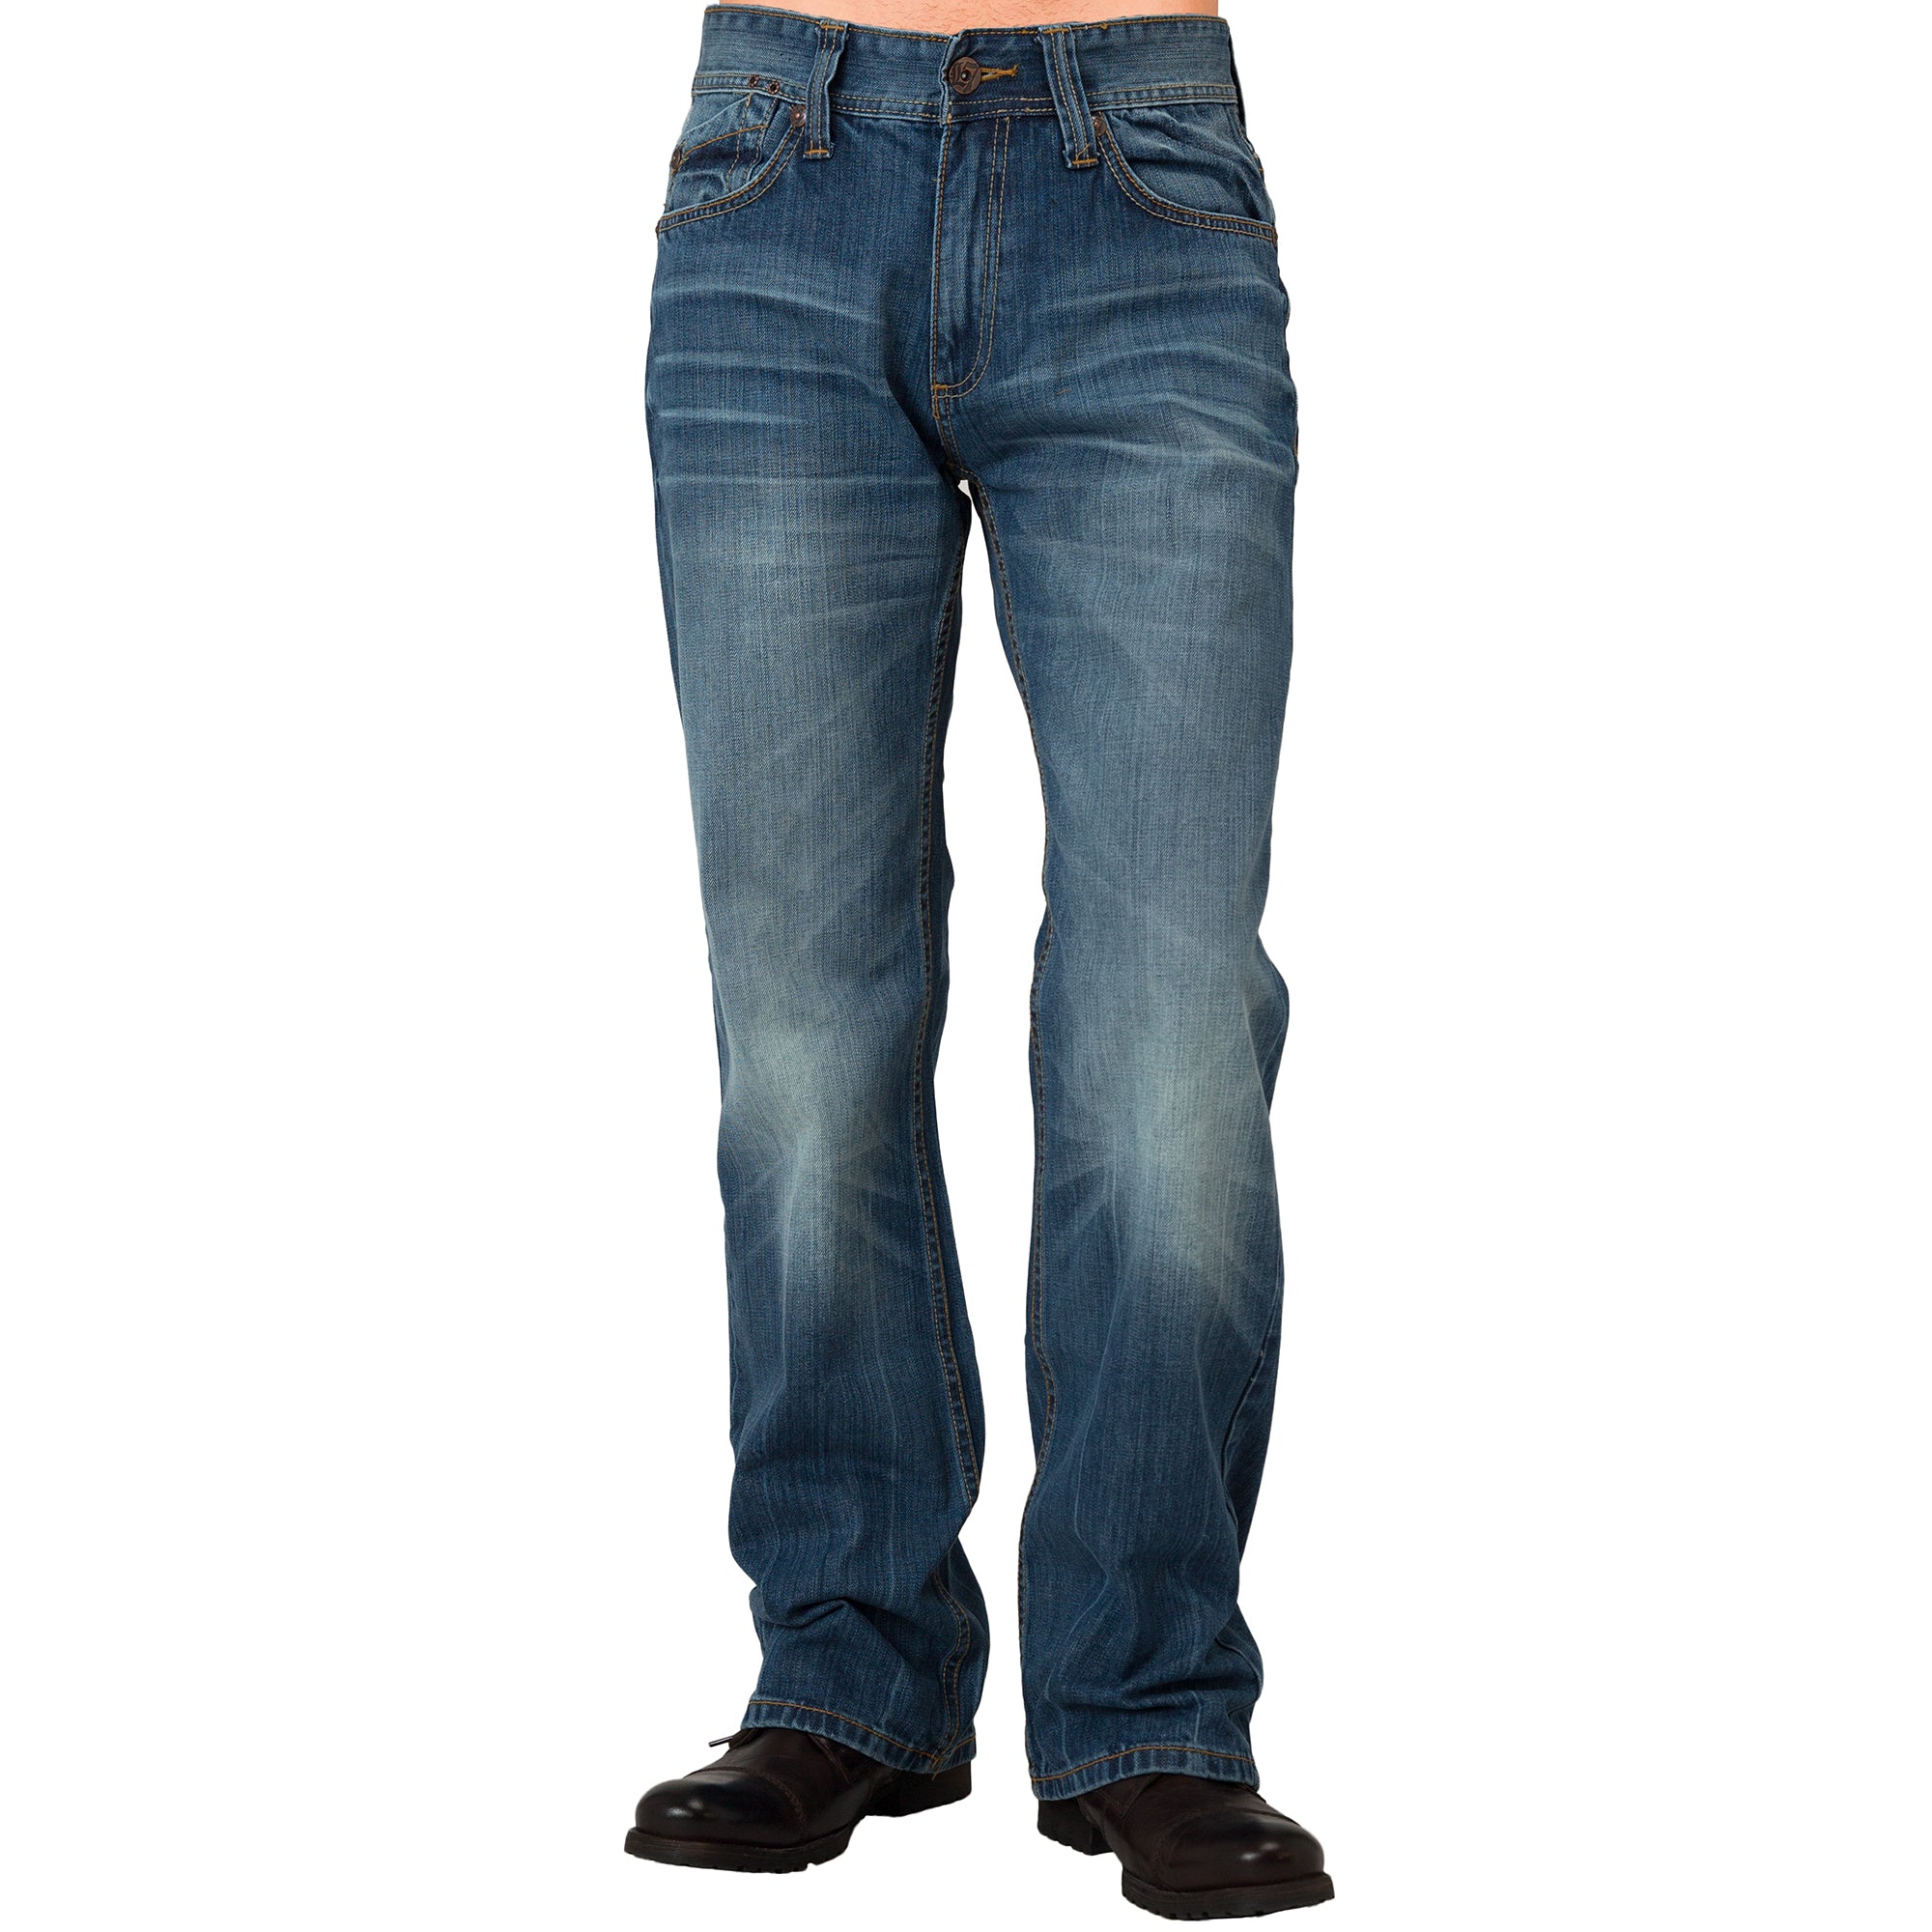 Midrise Relaxed Bootcut Medium Blue Premium Denim 5 pocket Jeans with Vintage Wash Whiskering